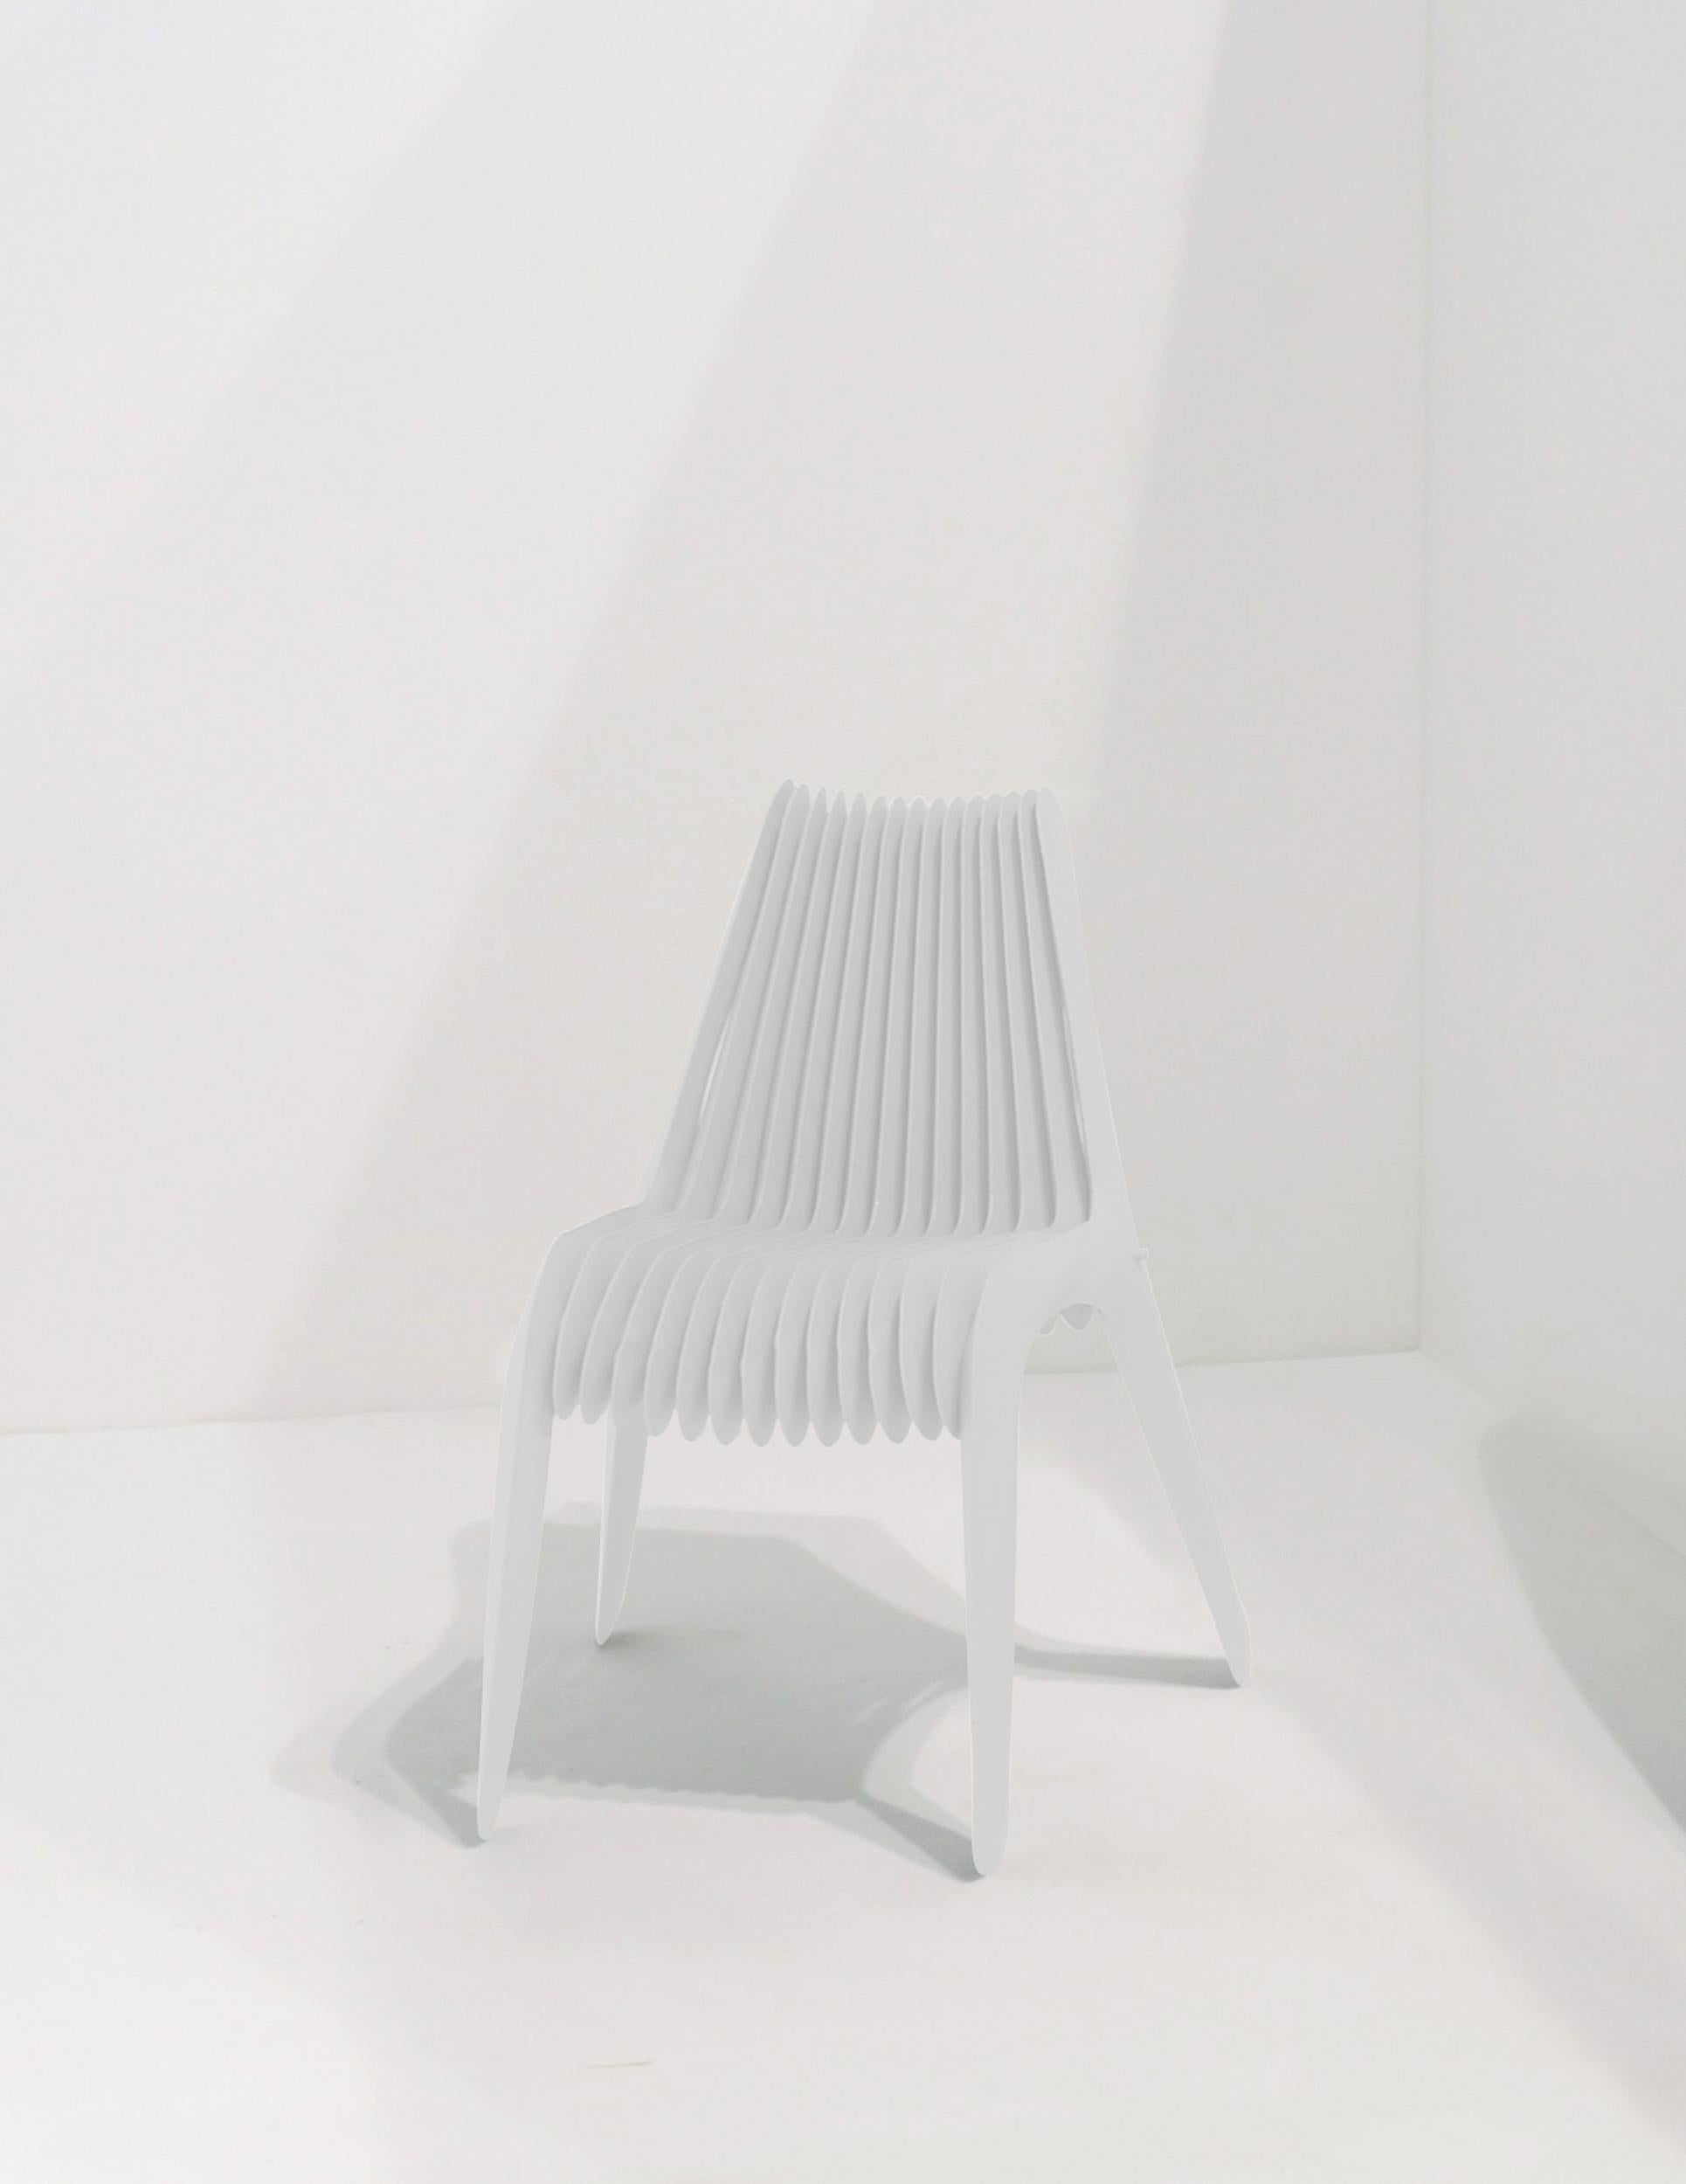 Painted Steel in Rotation Chair by Zieta, Graphite Grey, Carbon Steel For Sale